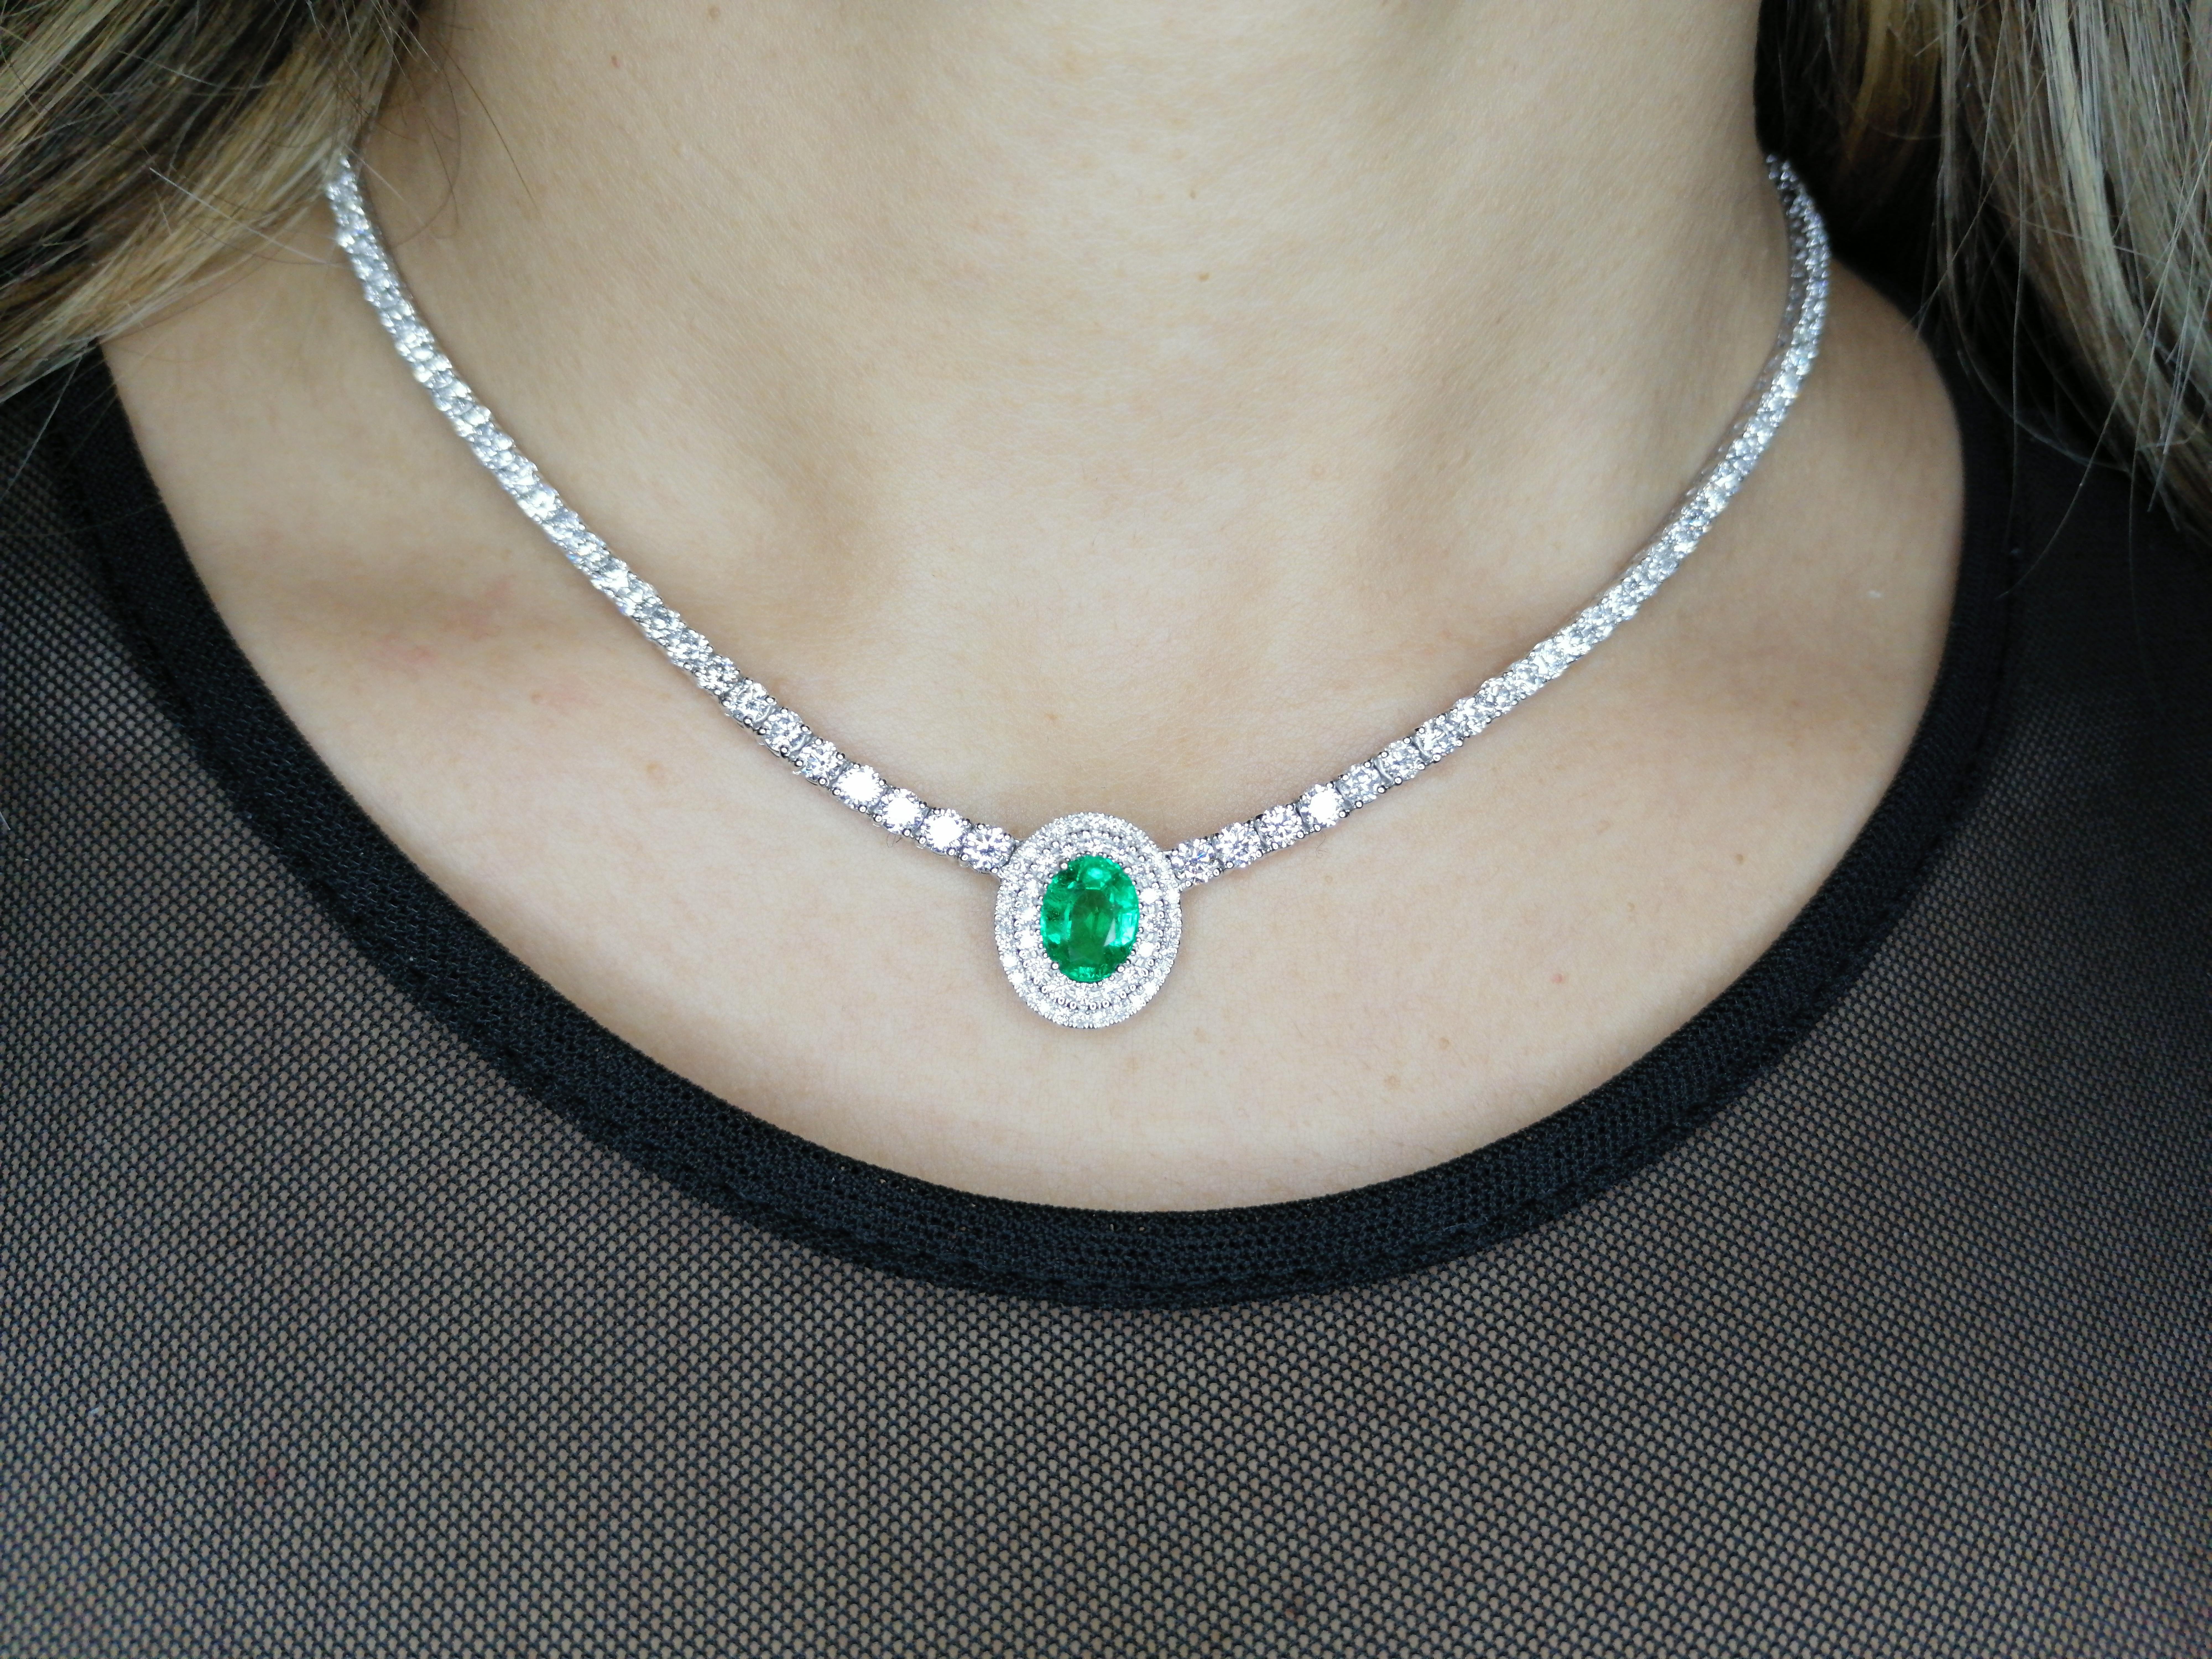 An amazing necklace all handmade in Italy by our expert goldsmiths. The main stone is a natural certified brazilian emerald with high luster and vs clarity! yes vs clarity so difficult to find in natural emeralds.

The necklace is exquisitely set